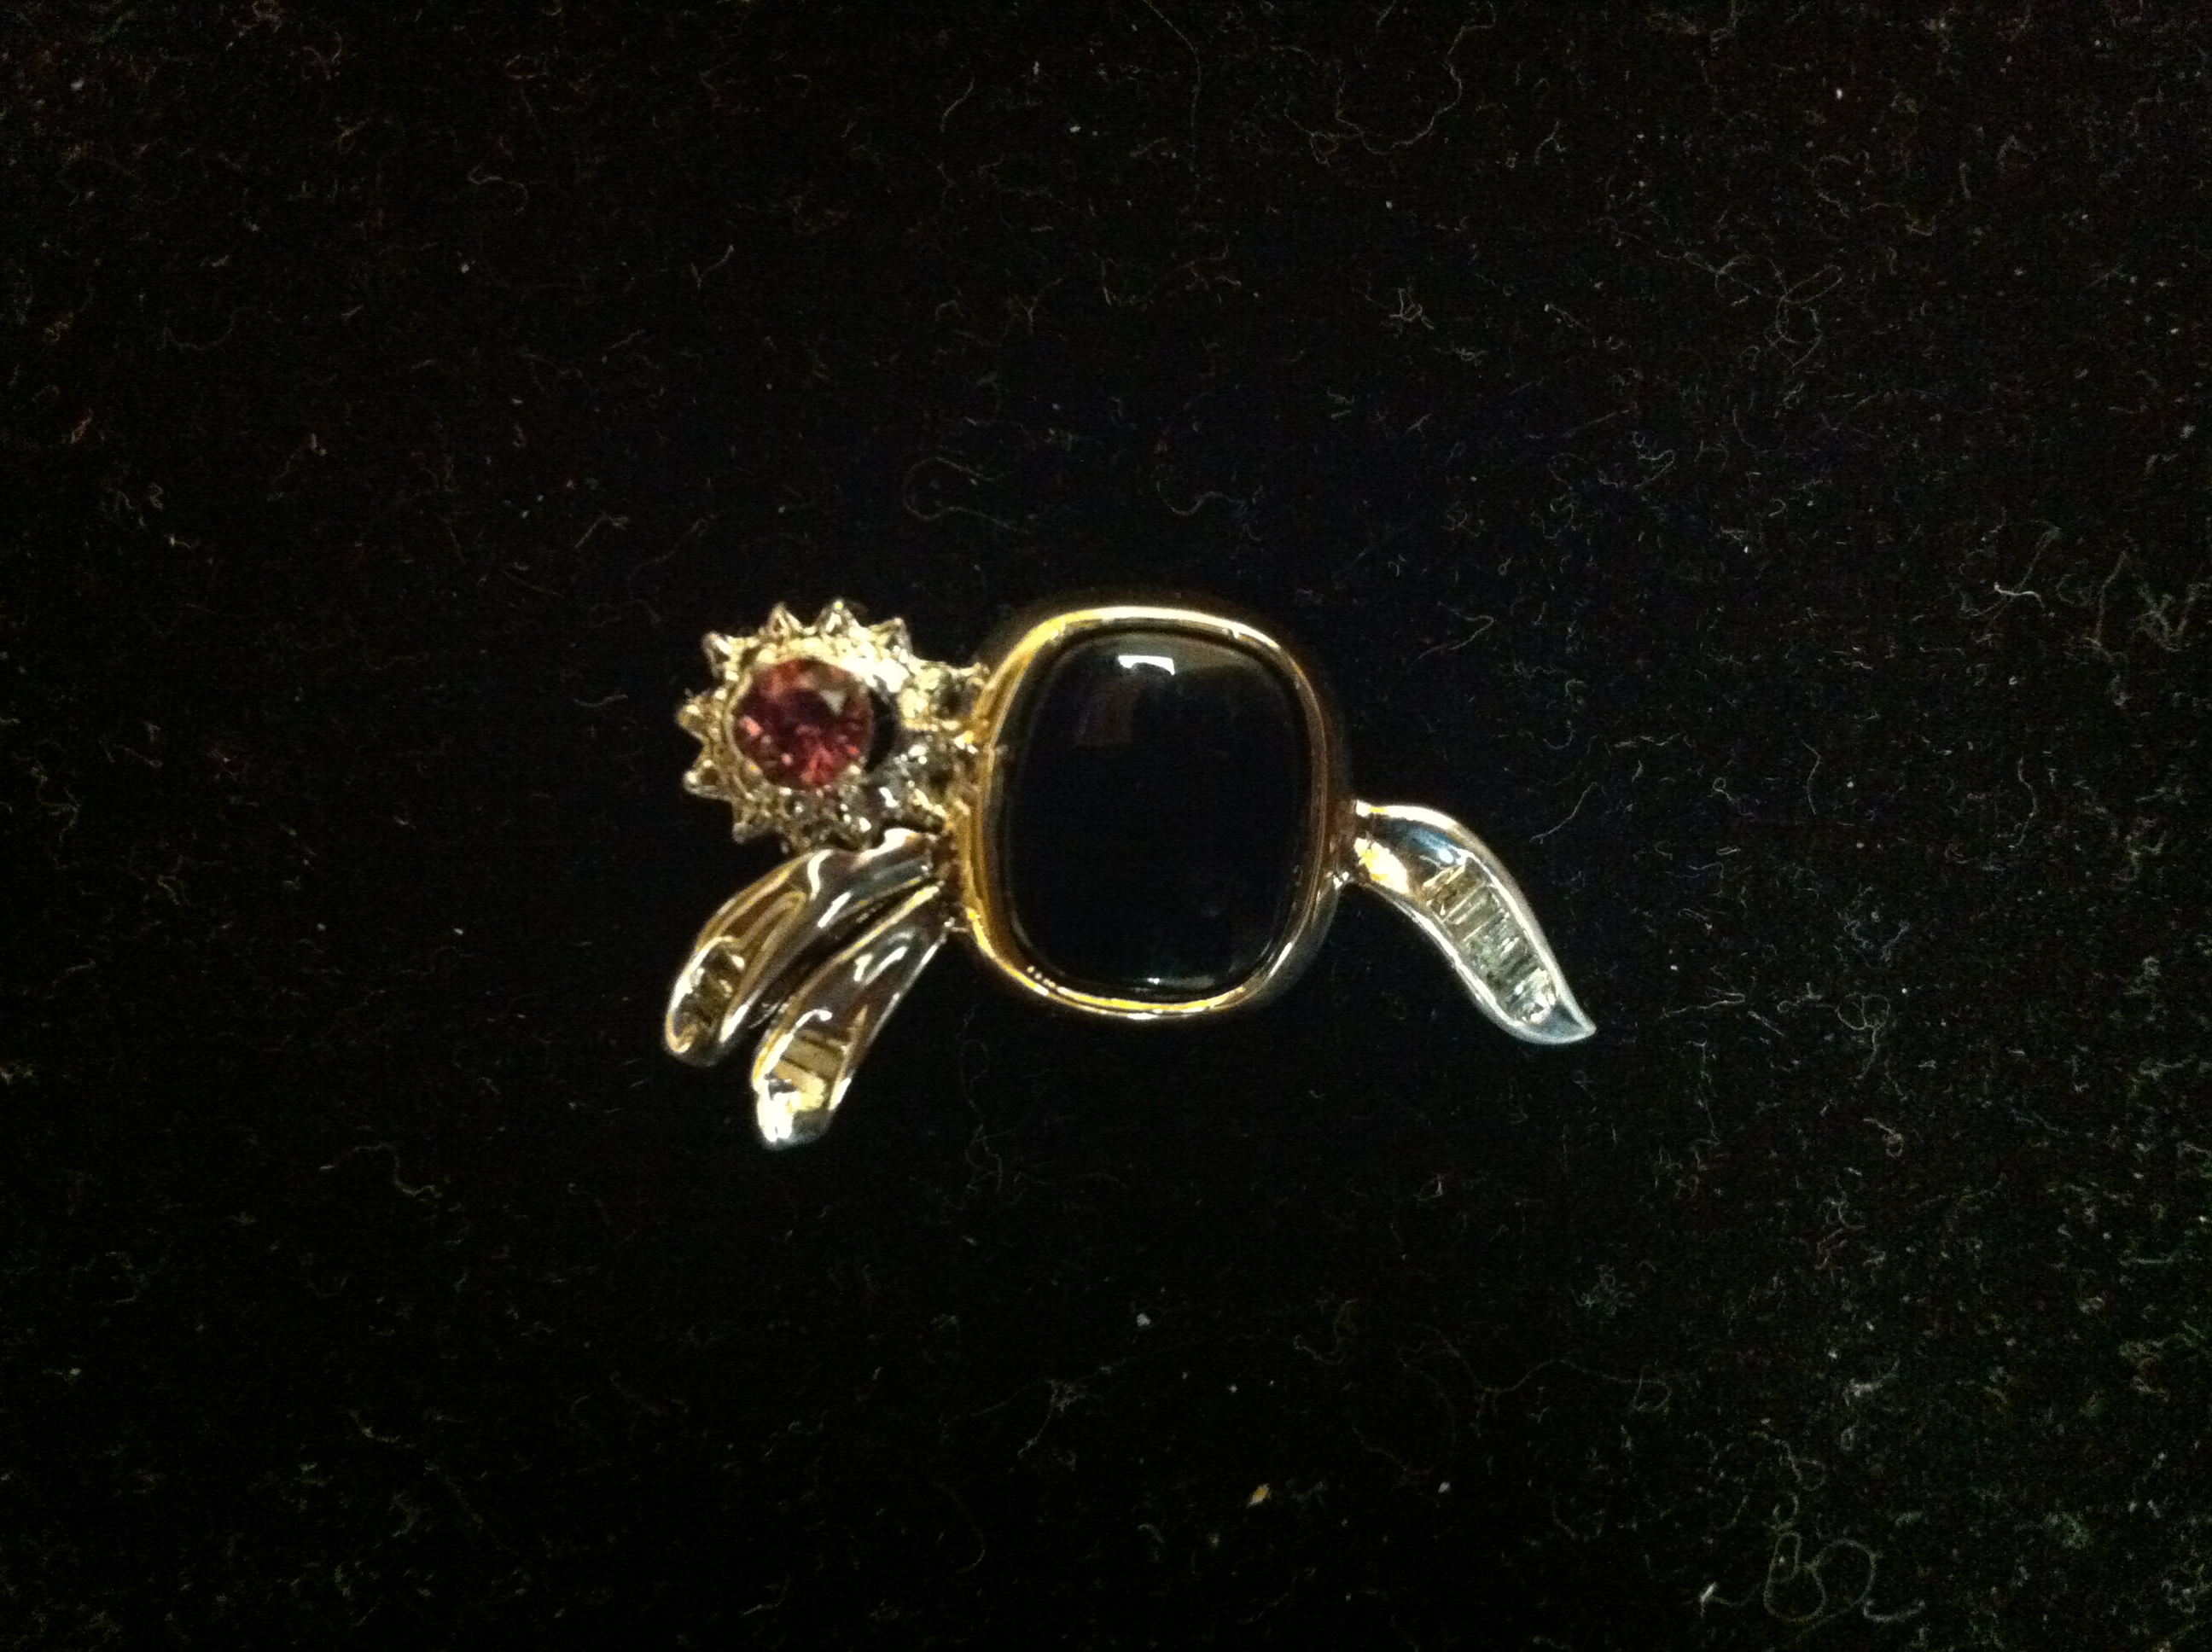 A gold pin with a black stone and a red stone